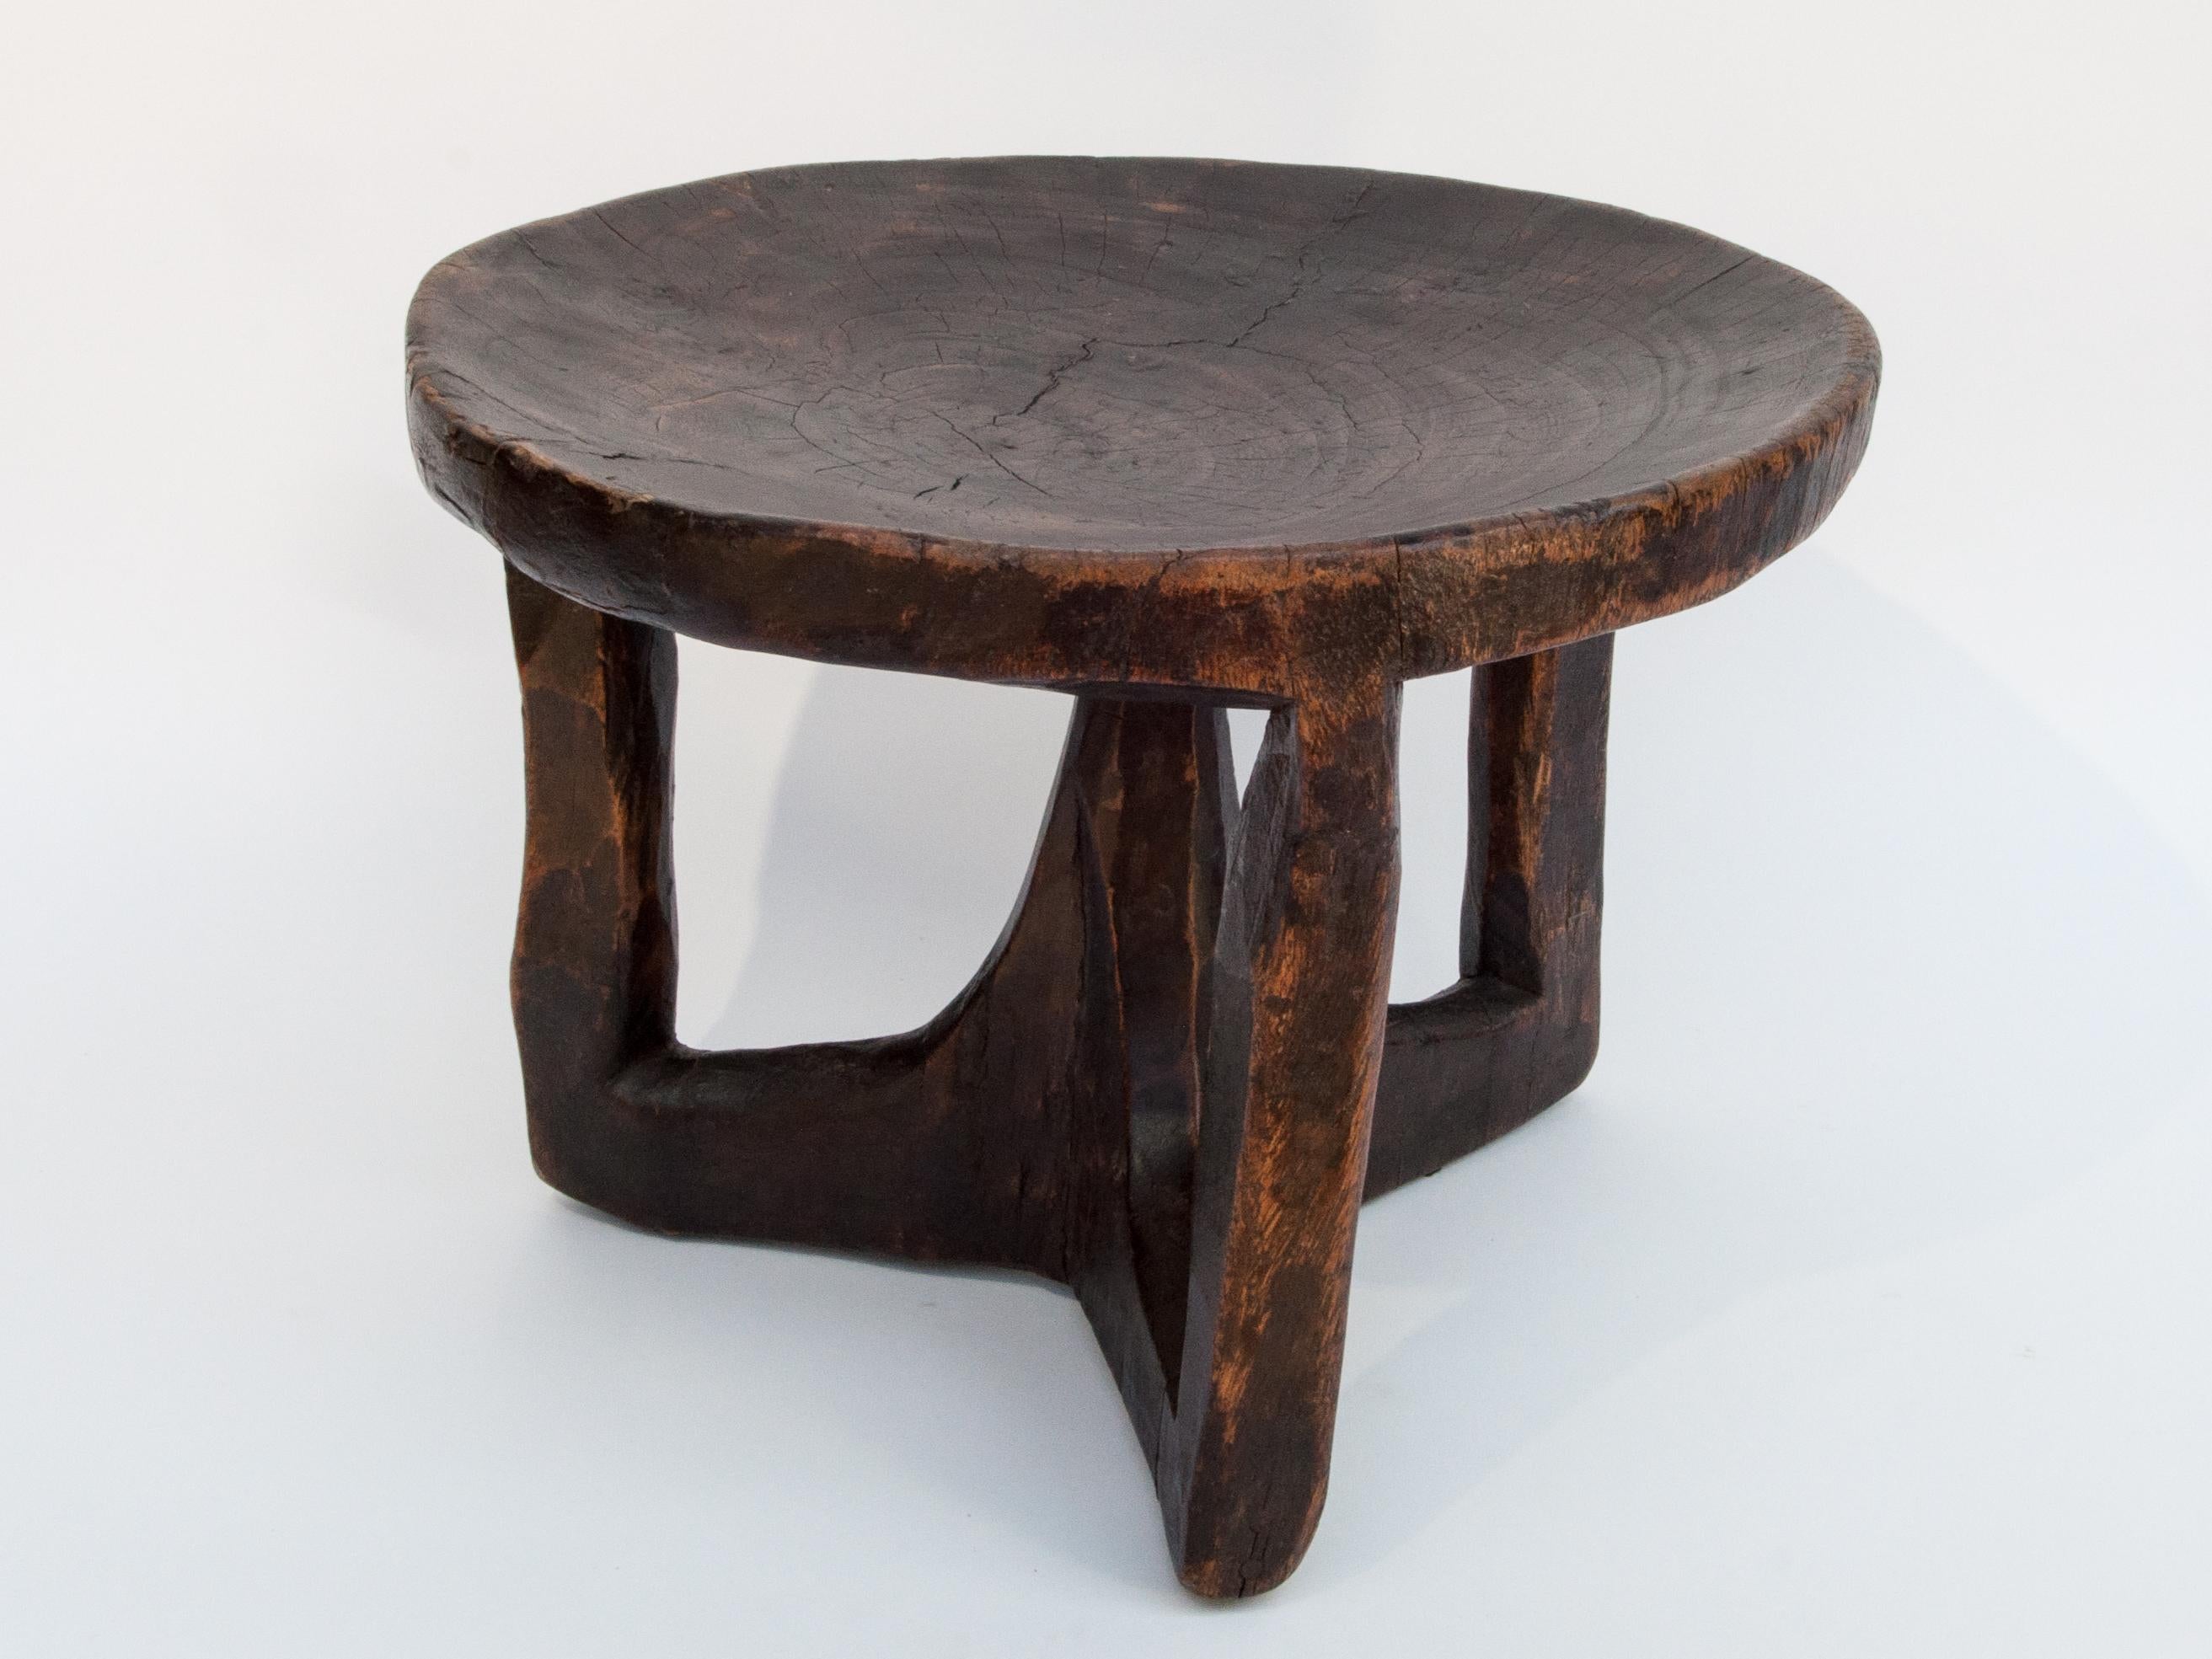 Short tribal wooden stool, from Ethiopia, mid-late 20th century.
Offered by Bruce Hughes.
This rustic wooden stool was fashioned by hand from a single piece of wood using basic tools. The adze marks are particularly visible on the underside of the